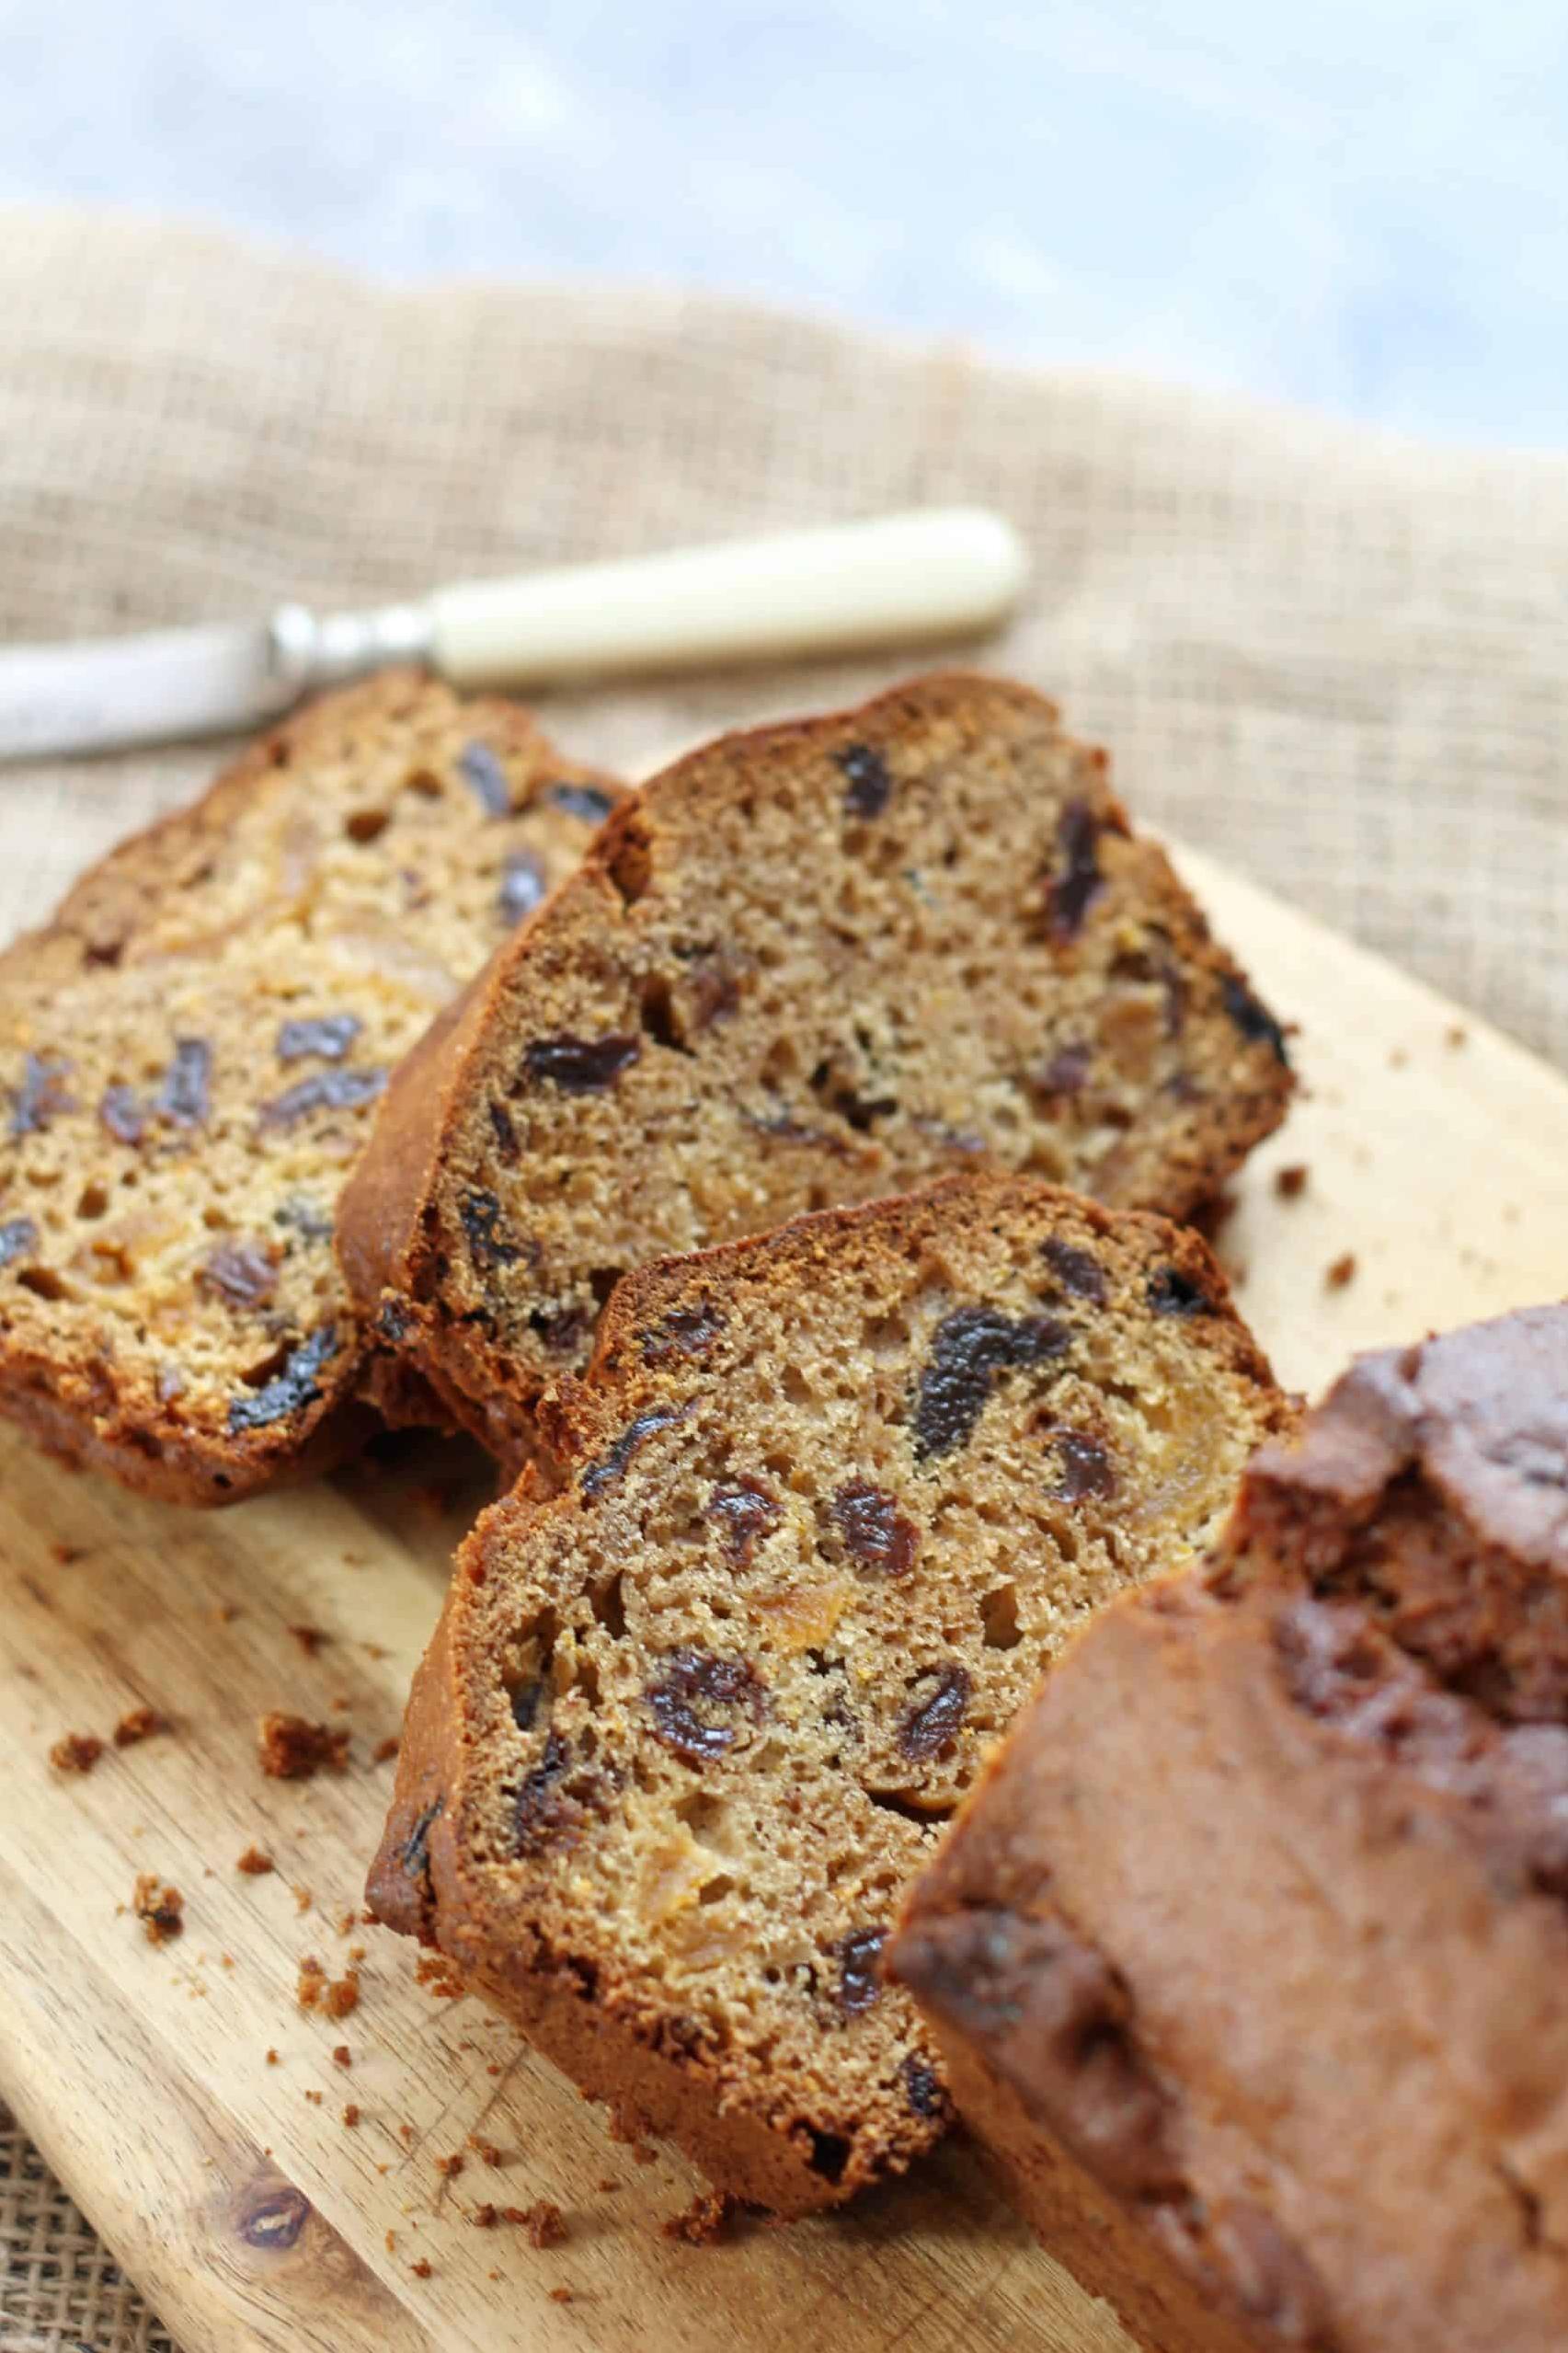  Here it is, the Gluten-Free Chocolate Amaretto Tea Bread—in its full and delicious glory!